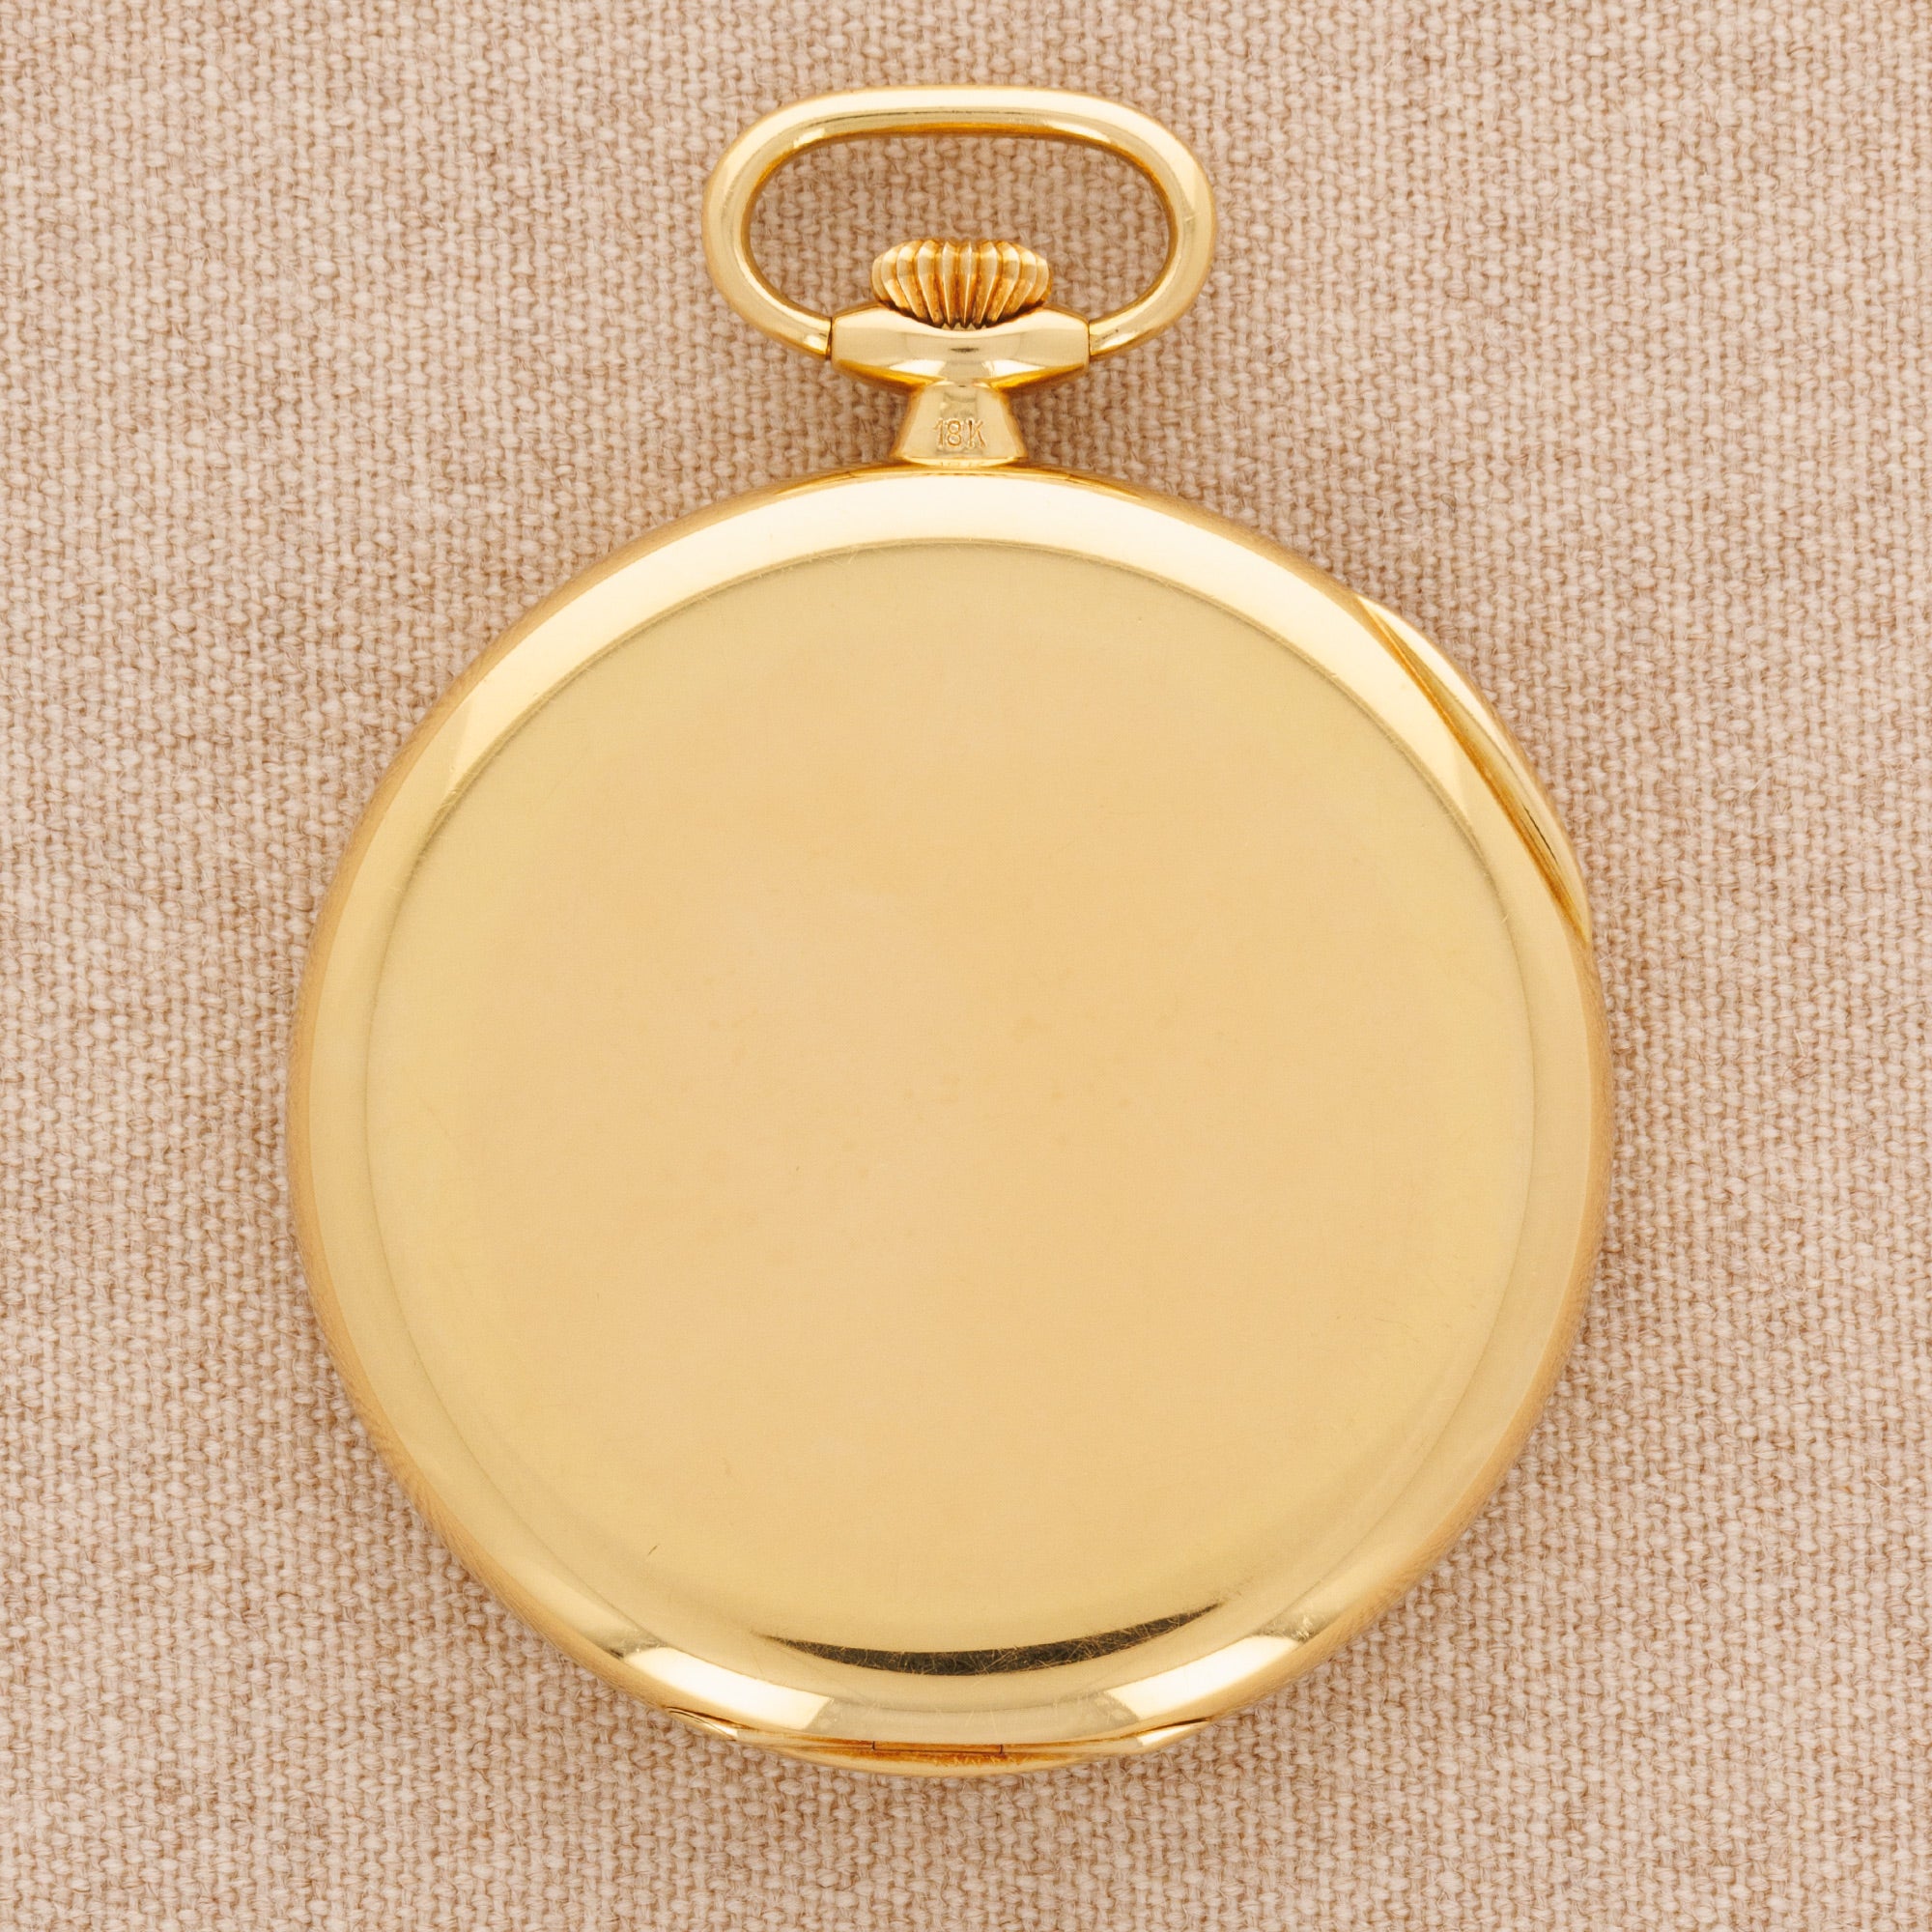 Patek Philippe - Patek Philippe Yellow Gold Pocket Watch Ref. 652 with Breguet Numerals Retailed by Tiffany &amp; Co. Ref. 652/1 - The Keystone Watches